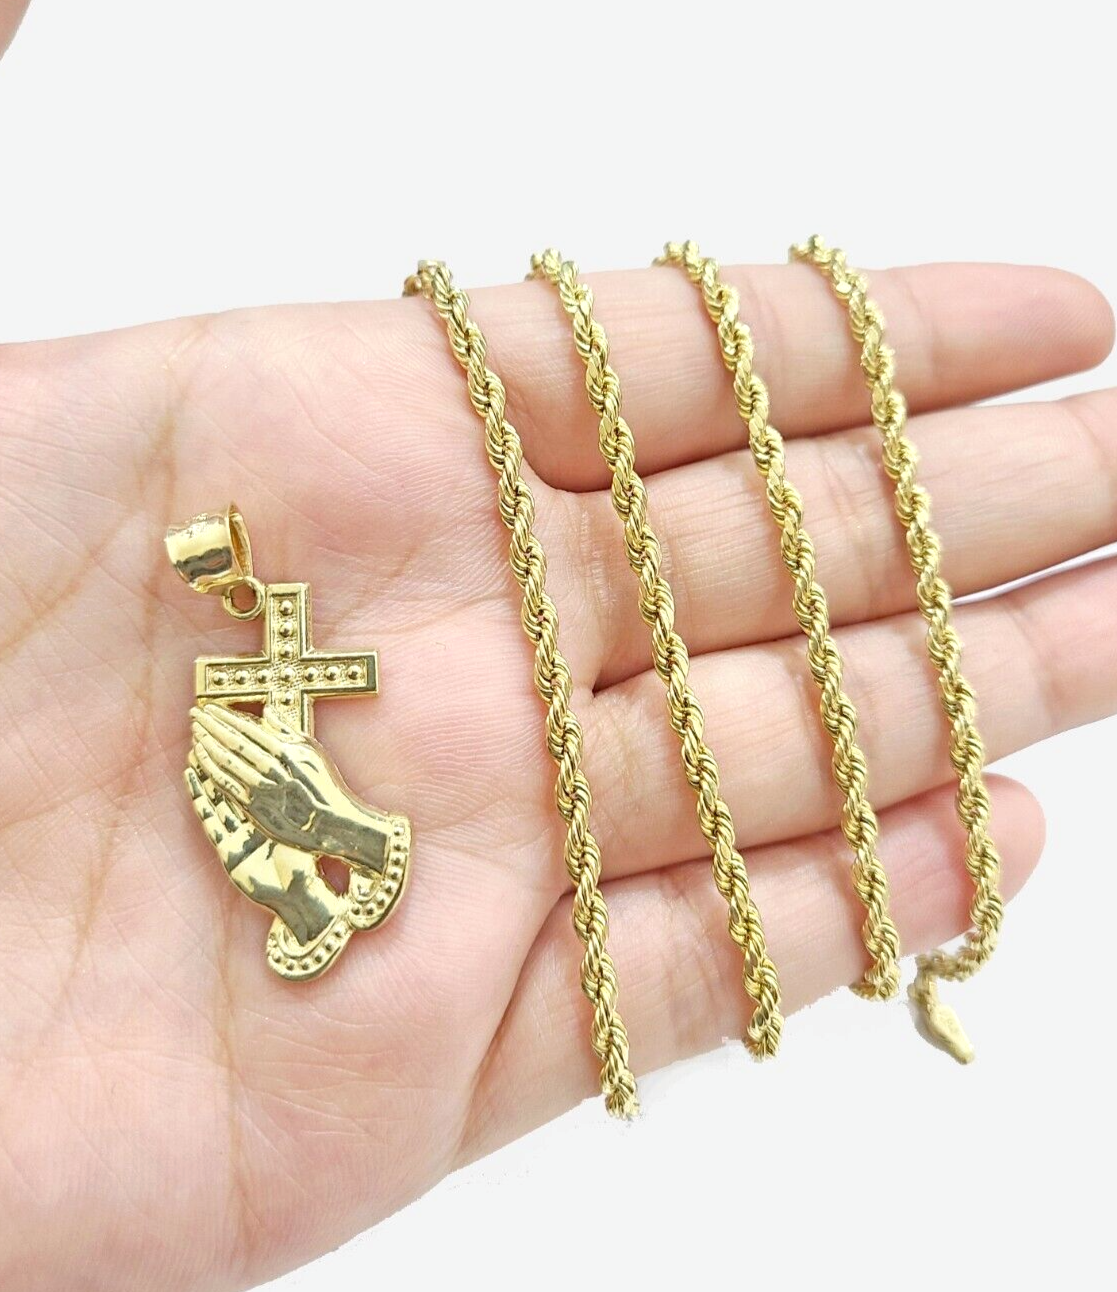 Real 10k Yellow Gold Rope Chain 18'' Necklace Praying Hand Cross Charm Pendant